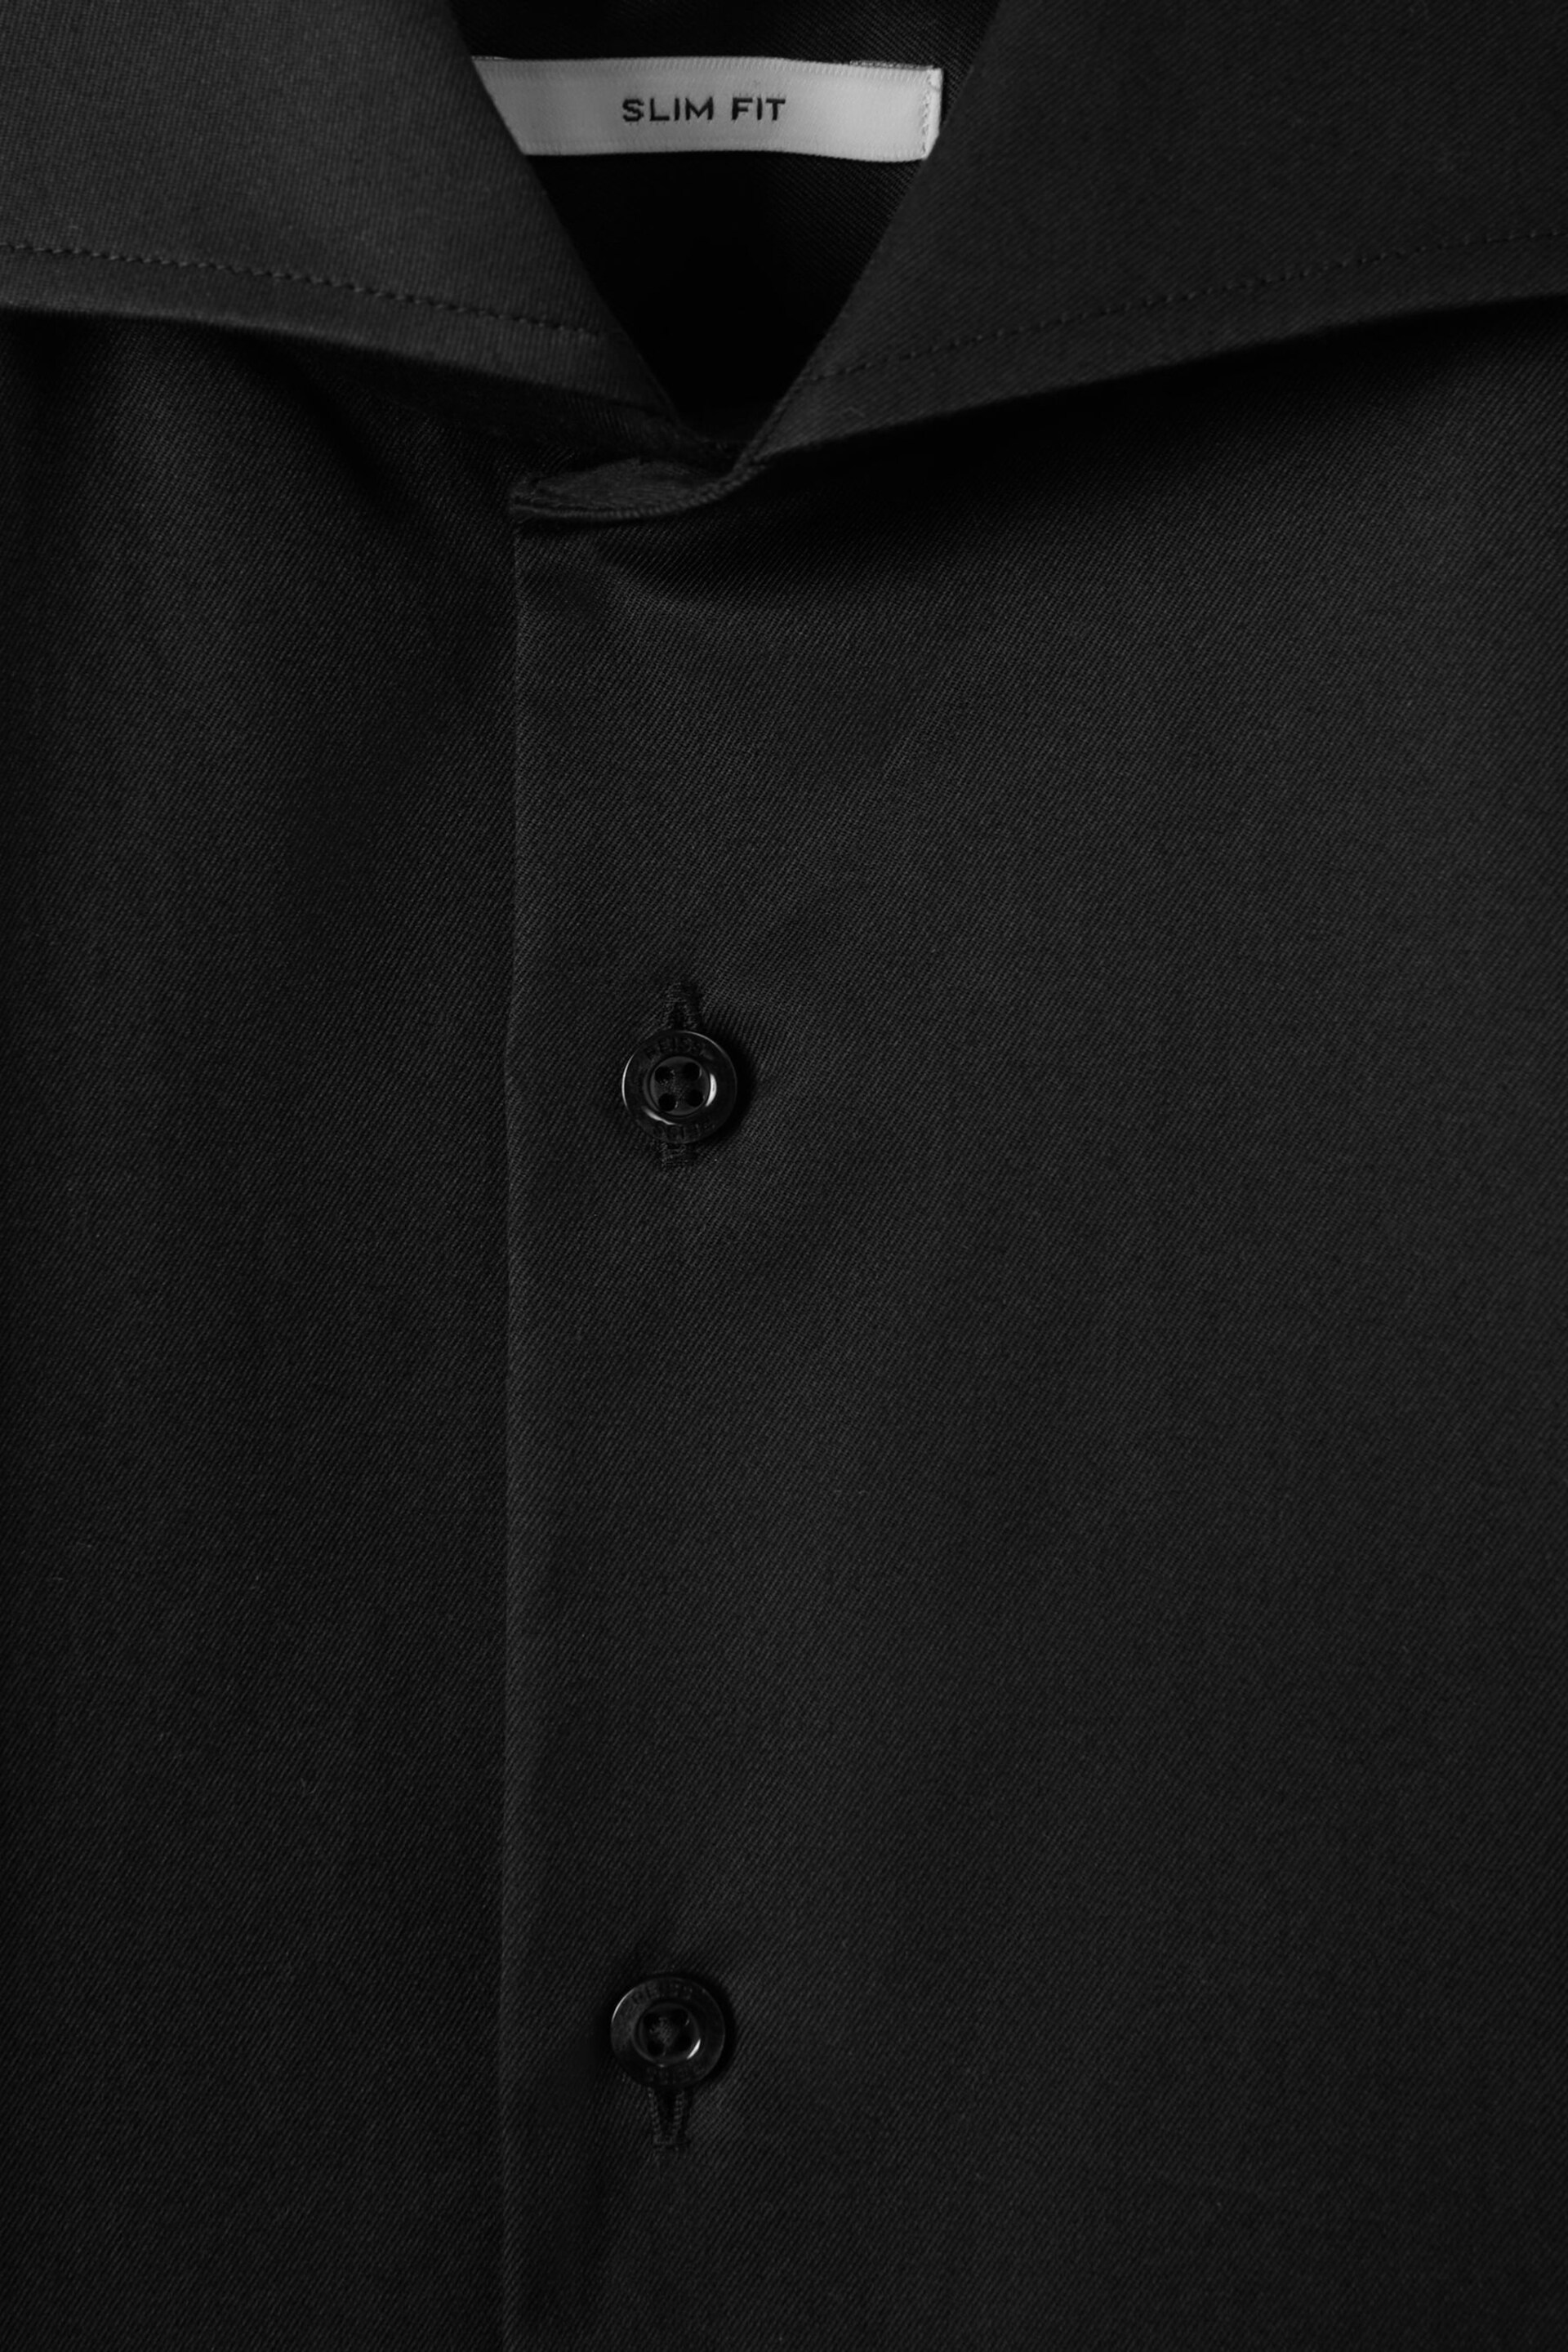 Reiss Black Storm Slim Fit Two-Fold Cotton Shirt - Image 6 of 6